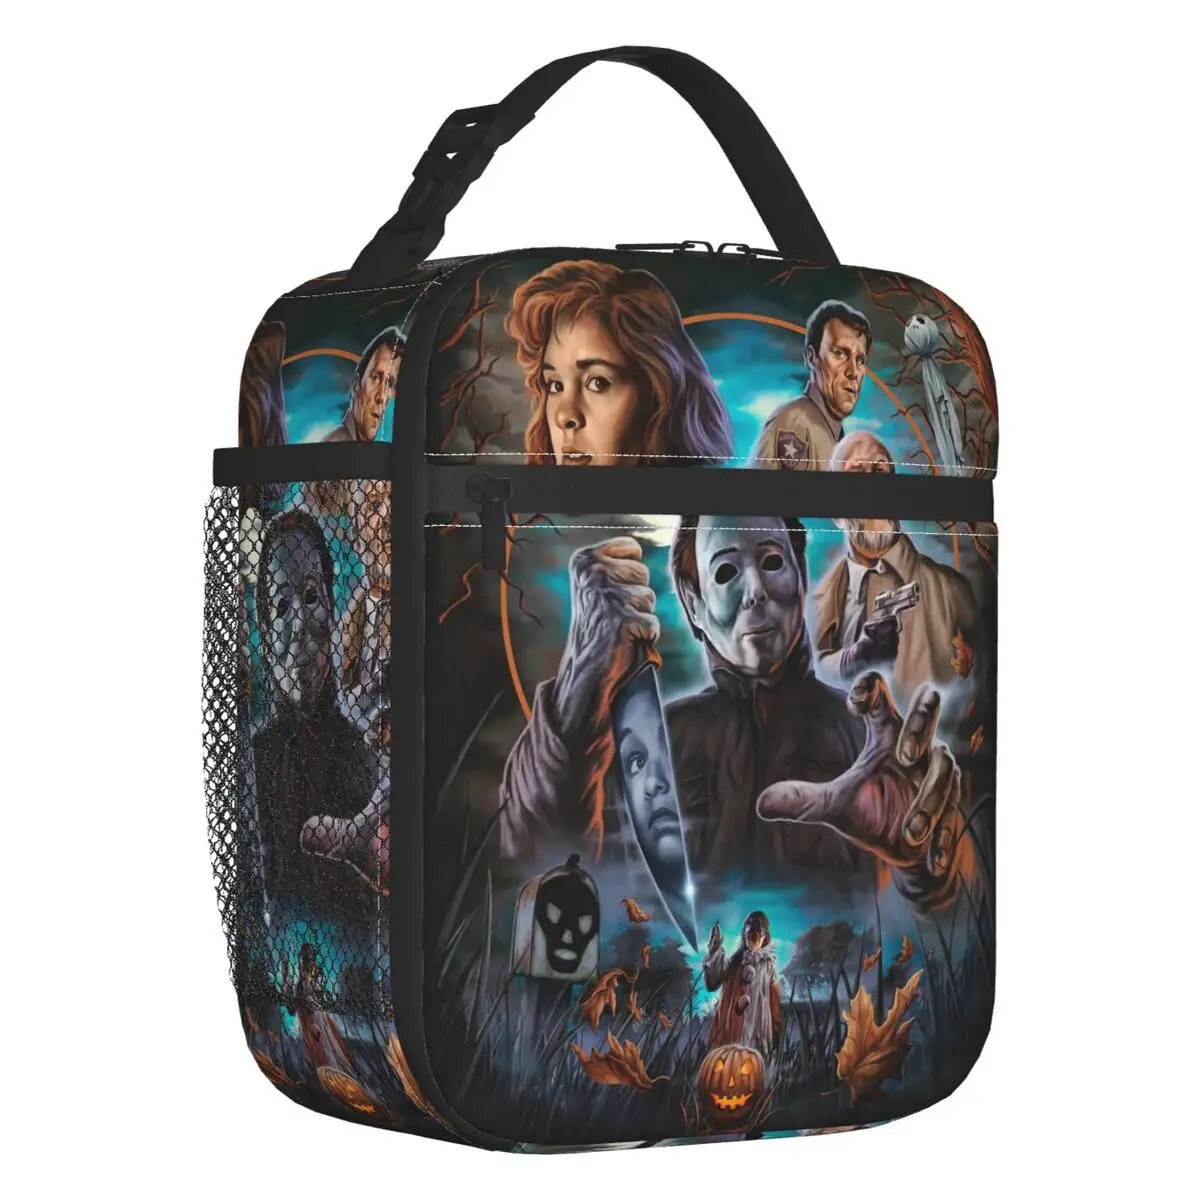 Michael Myers Knives Pumpkin Insulated Lunch Bags for School Office Halloween Horror Film Resuable Cooler Thermal Bento Box Kids